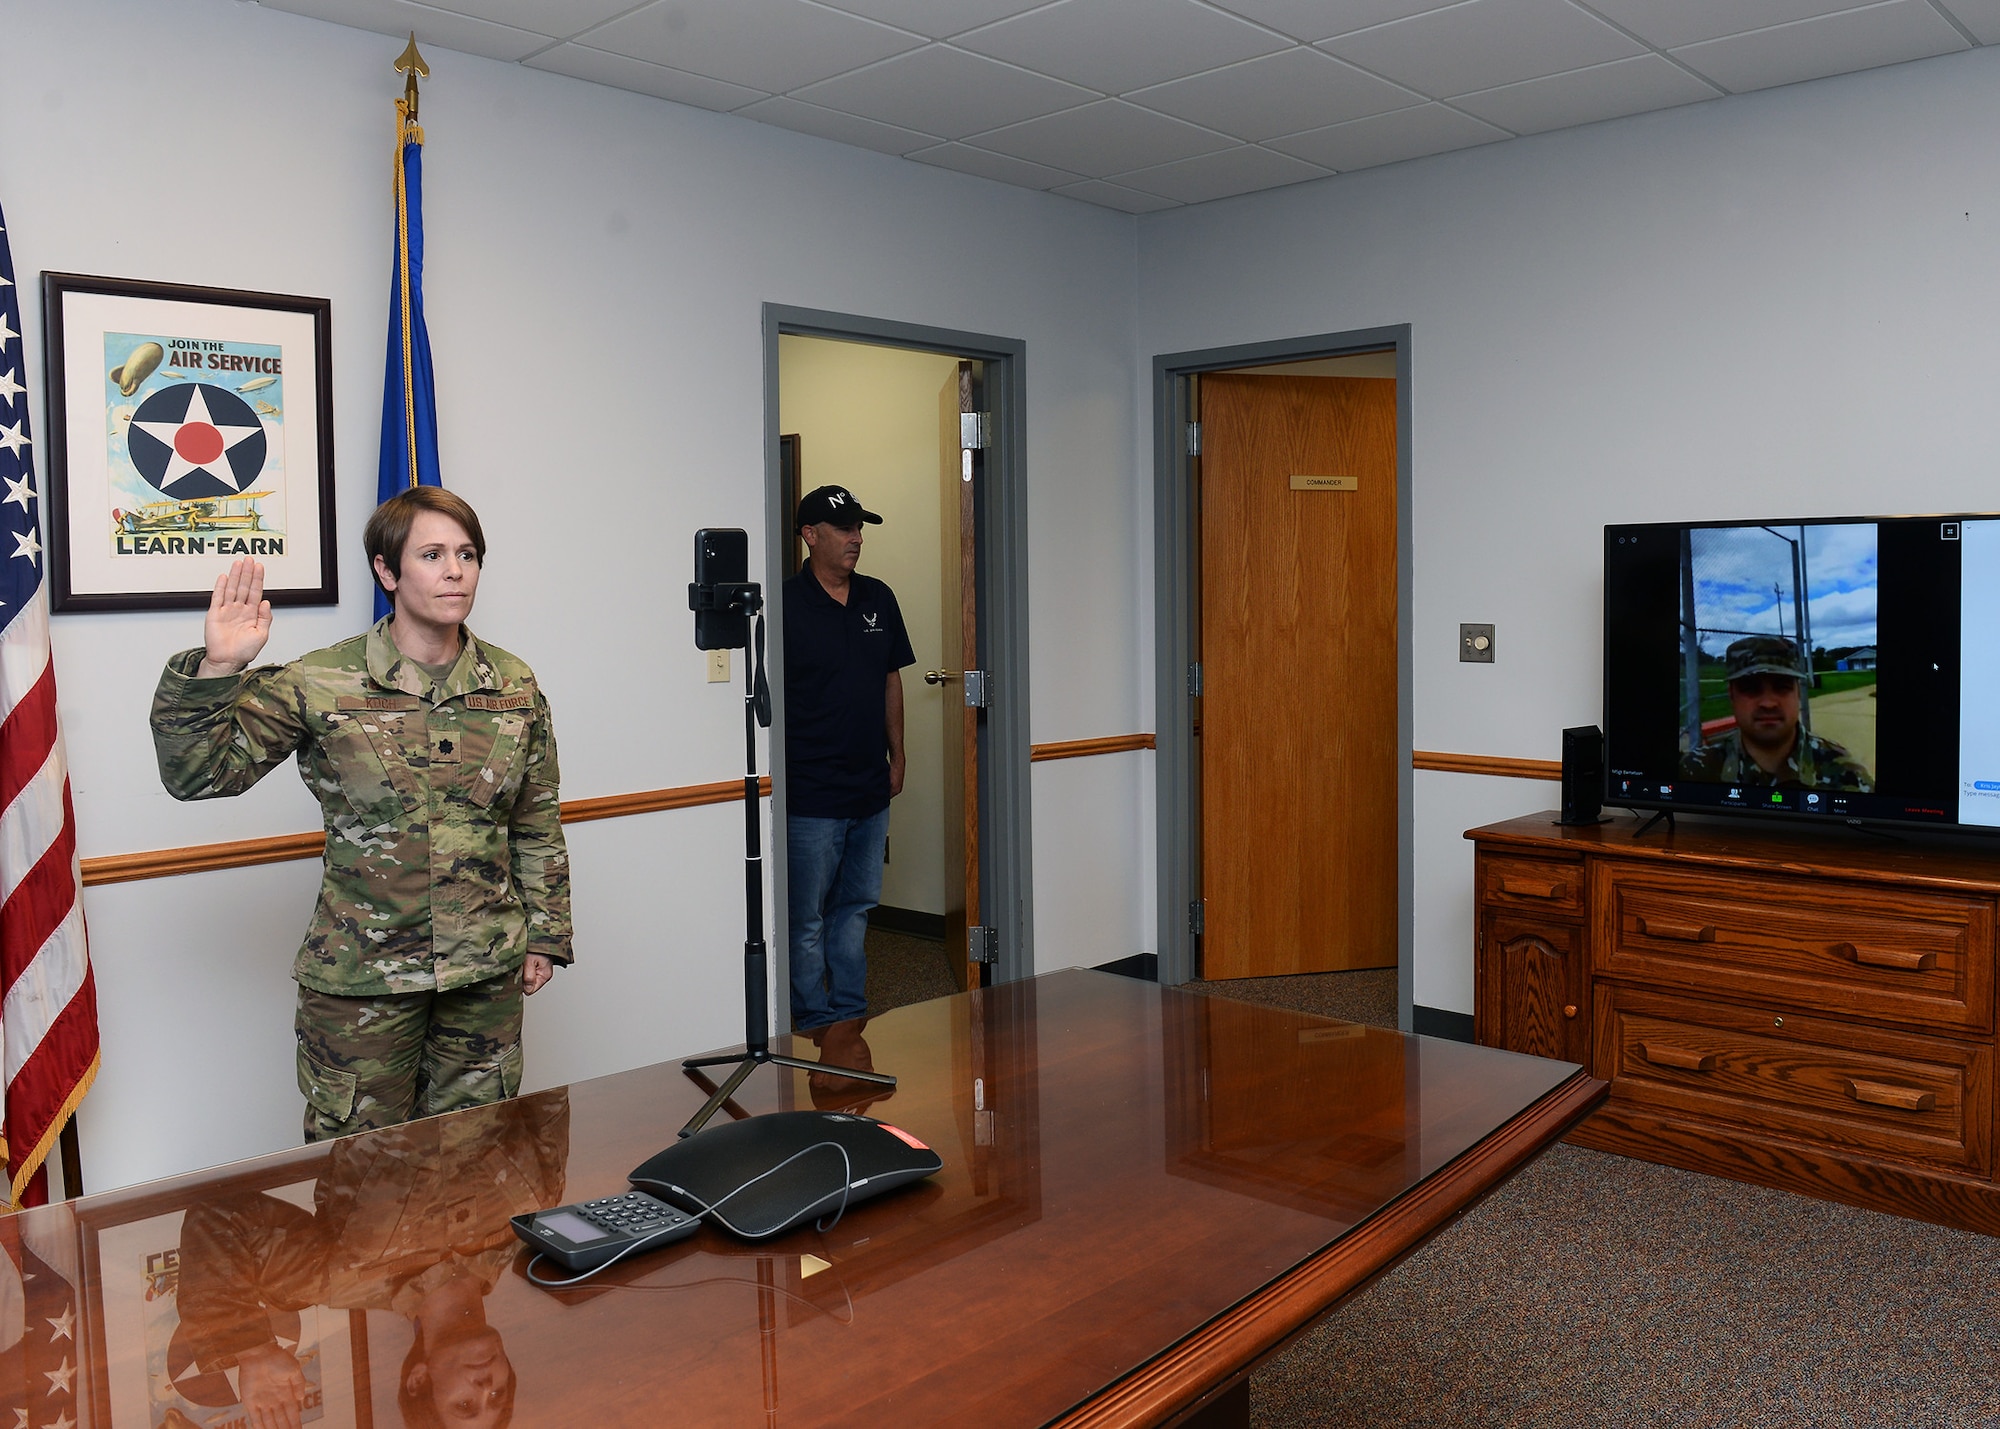 female Lieutenant Colonel standing in conference room with U.S. flag and Air Force flags behind her and in front of cell phone with her right hand raised to the right of the photograph a Technical Sergeant on a large television screen; as he takes oath of enlistment